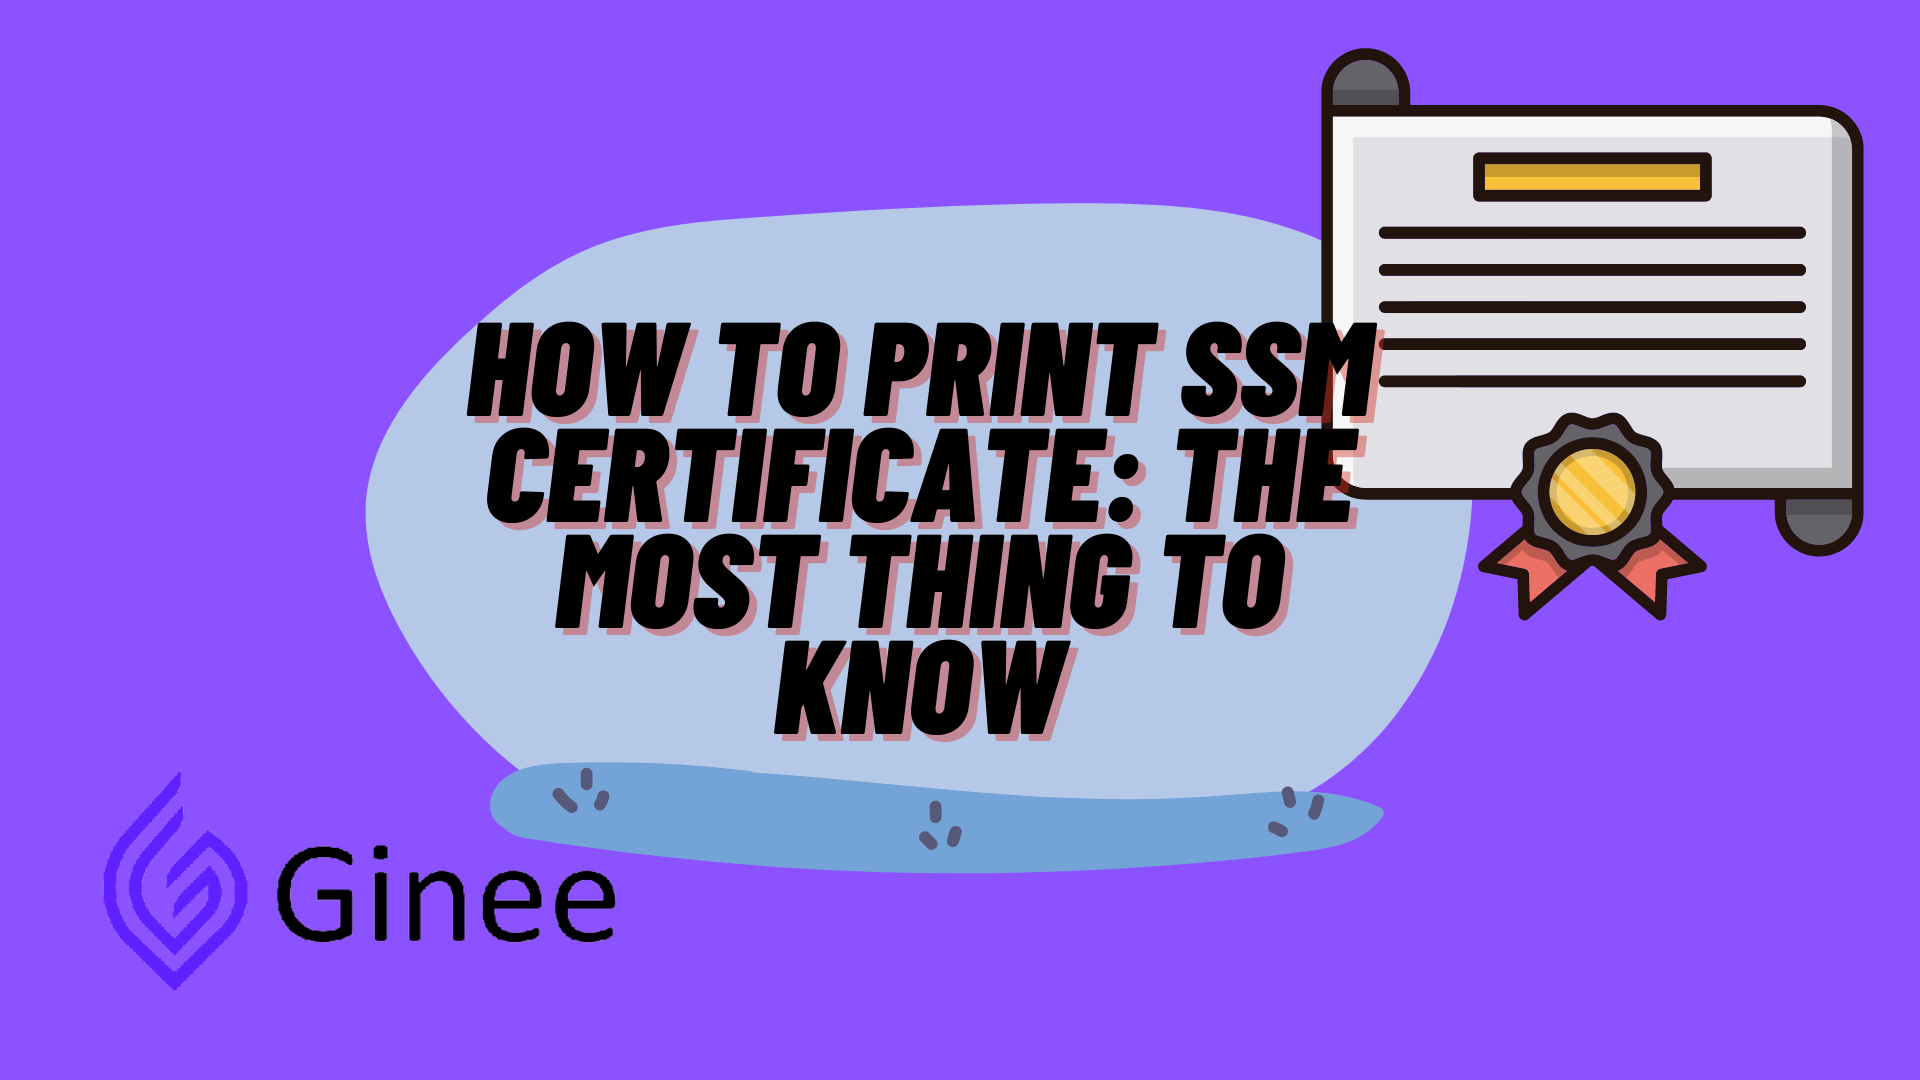 How To Print SSM Certificate: The Most Thing To Know - Ginee